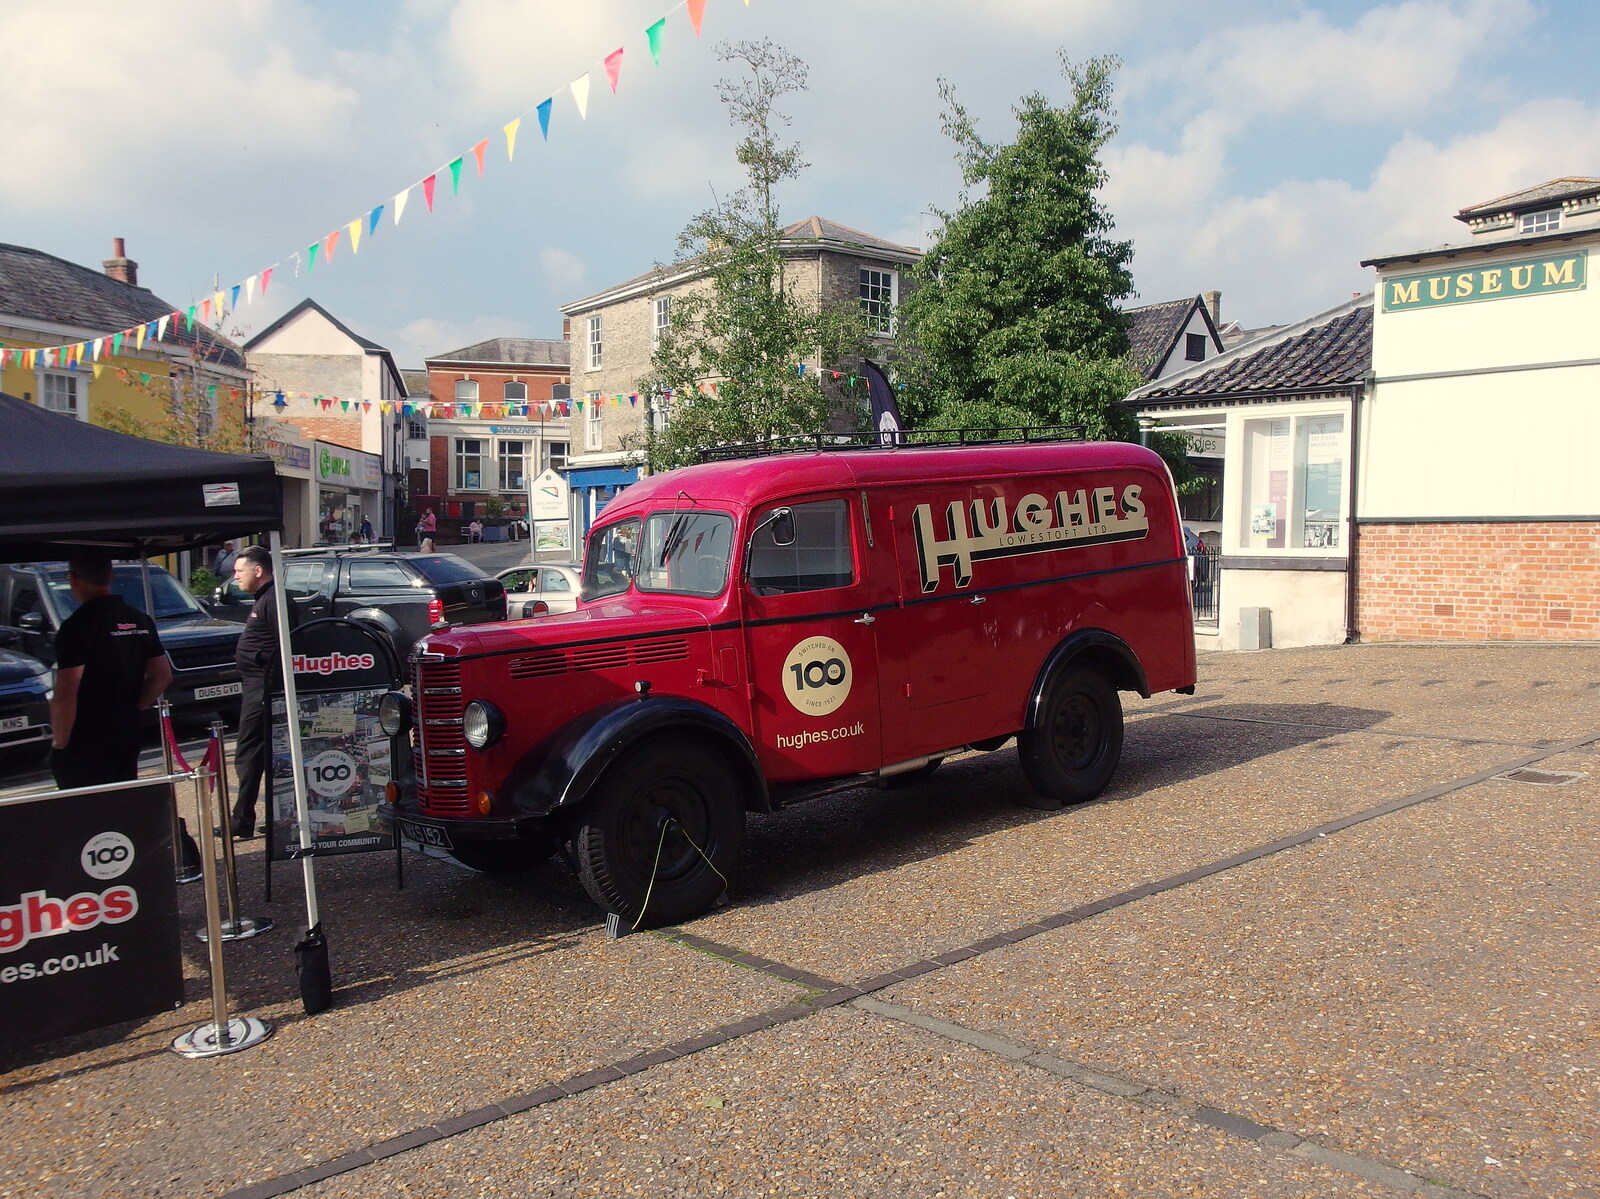 Hughes has a nice old van out on the Market Place from Sunday Lunch at the Village Hall, Brome, Suffolk - 10th October 2021